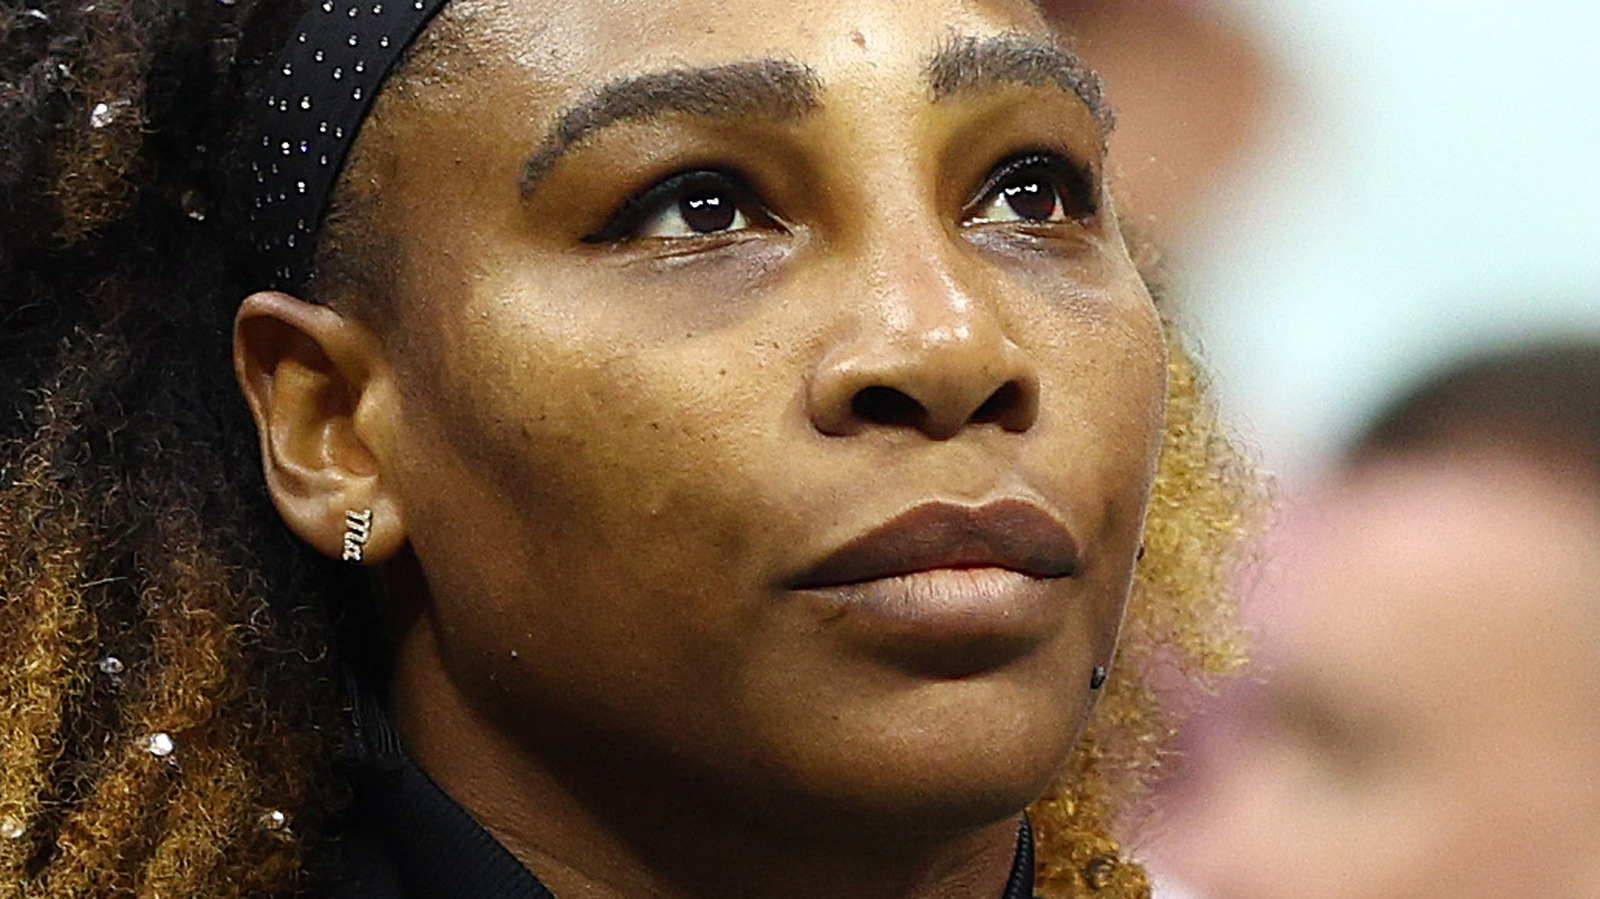 Serena Williams’ Daughter Olympia Stole The Show At The U.S. Open